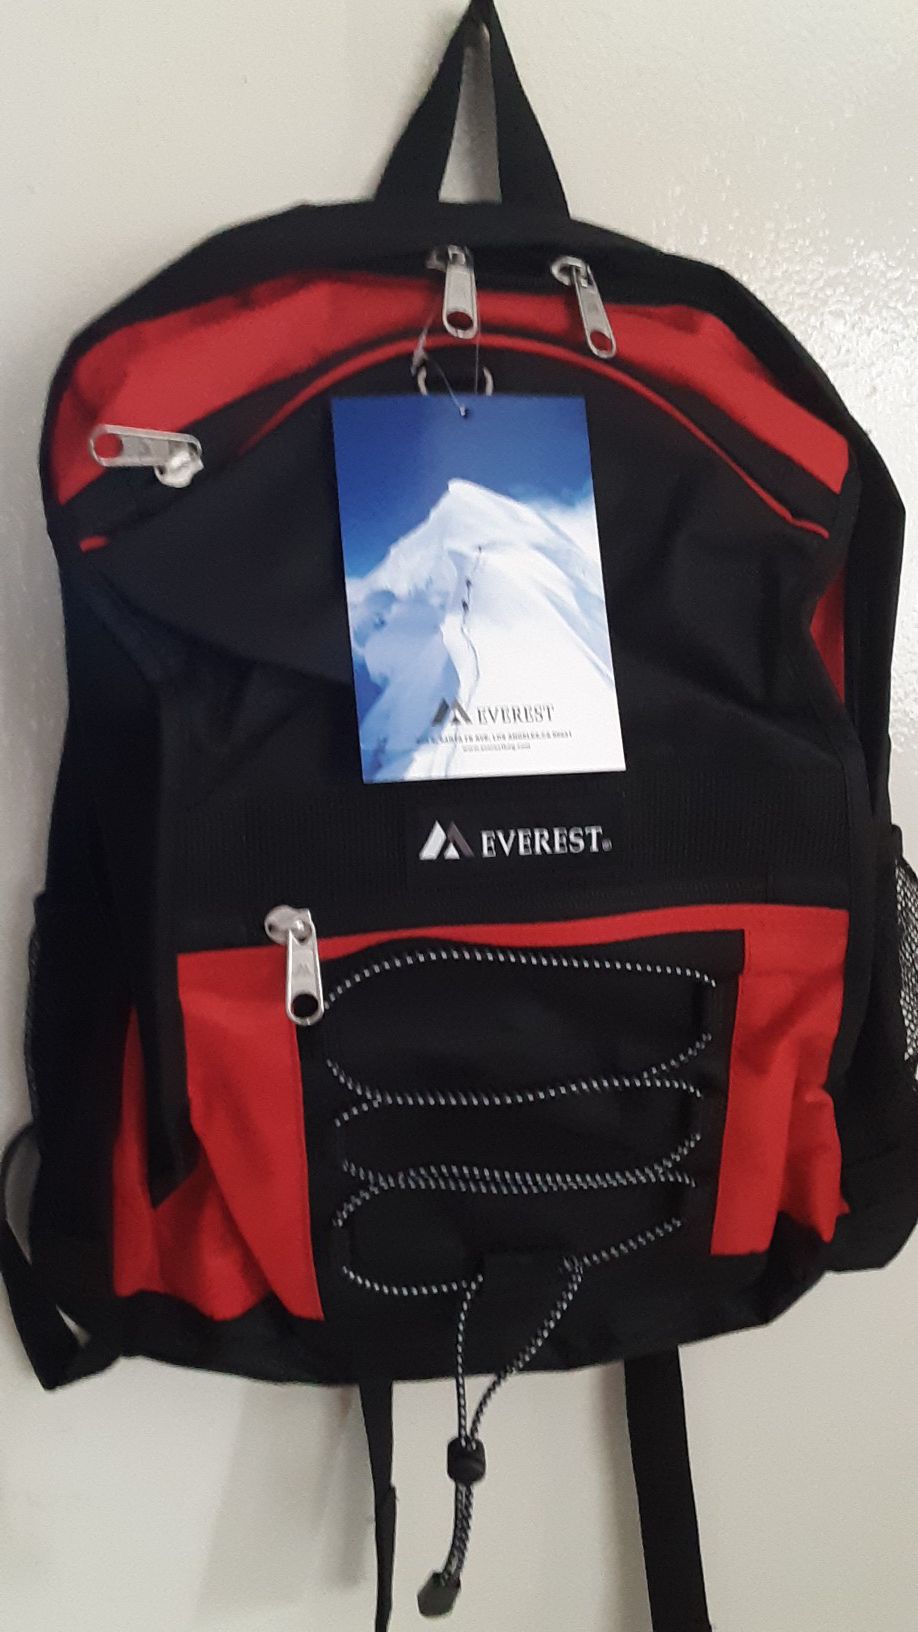 Everest two-tone red backpack